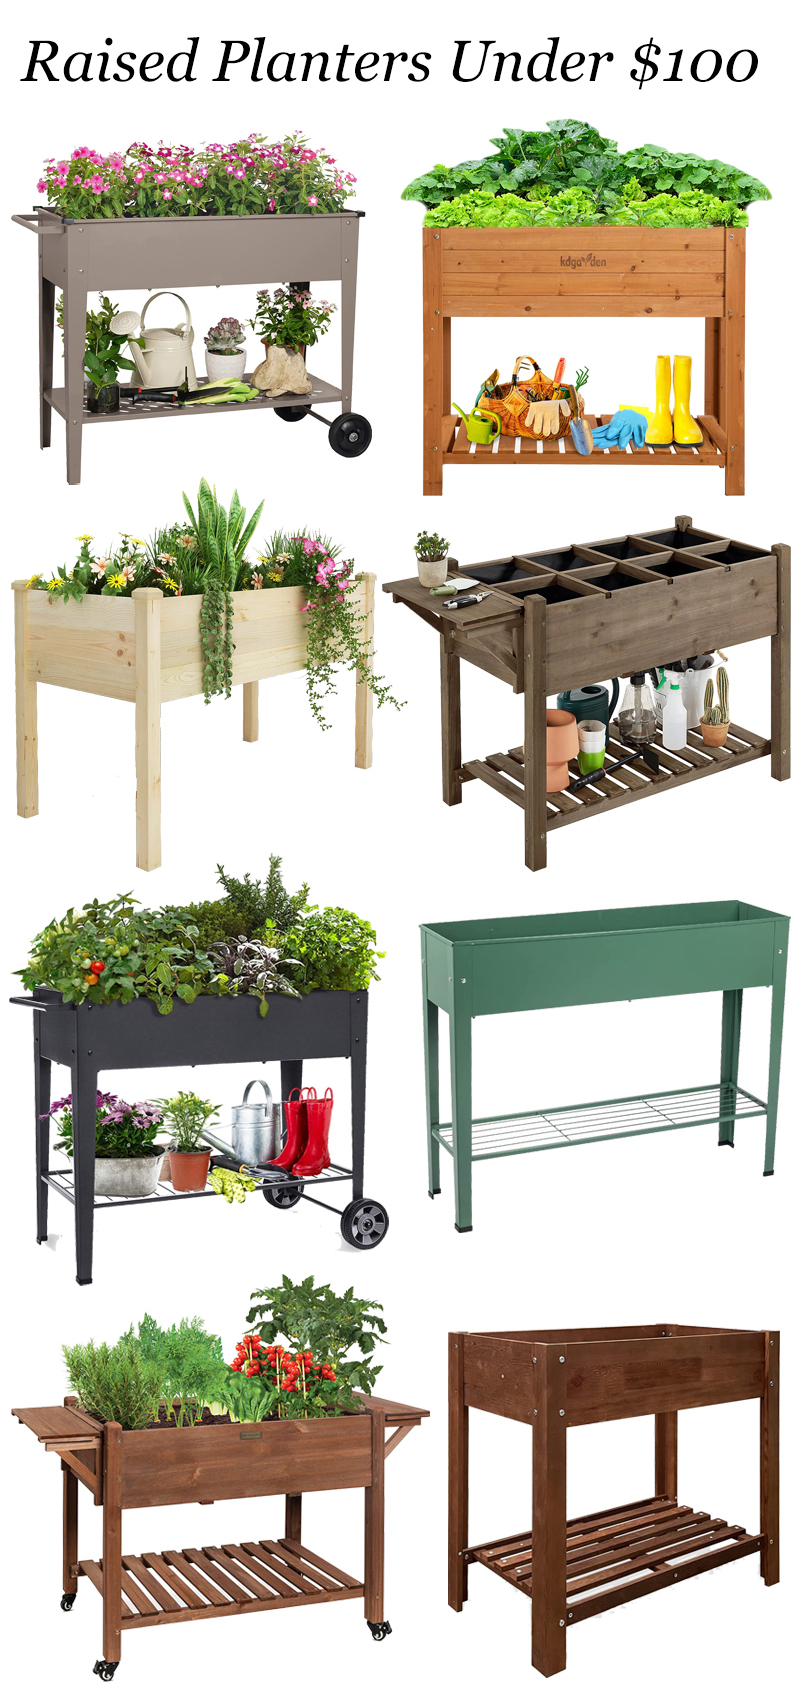 Raised planters and herb beds under $100